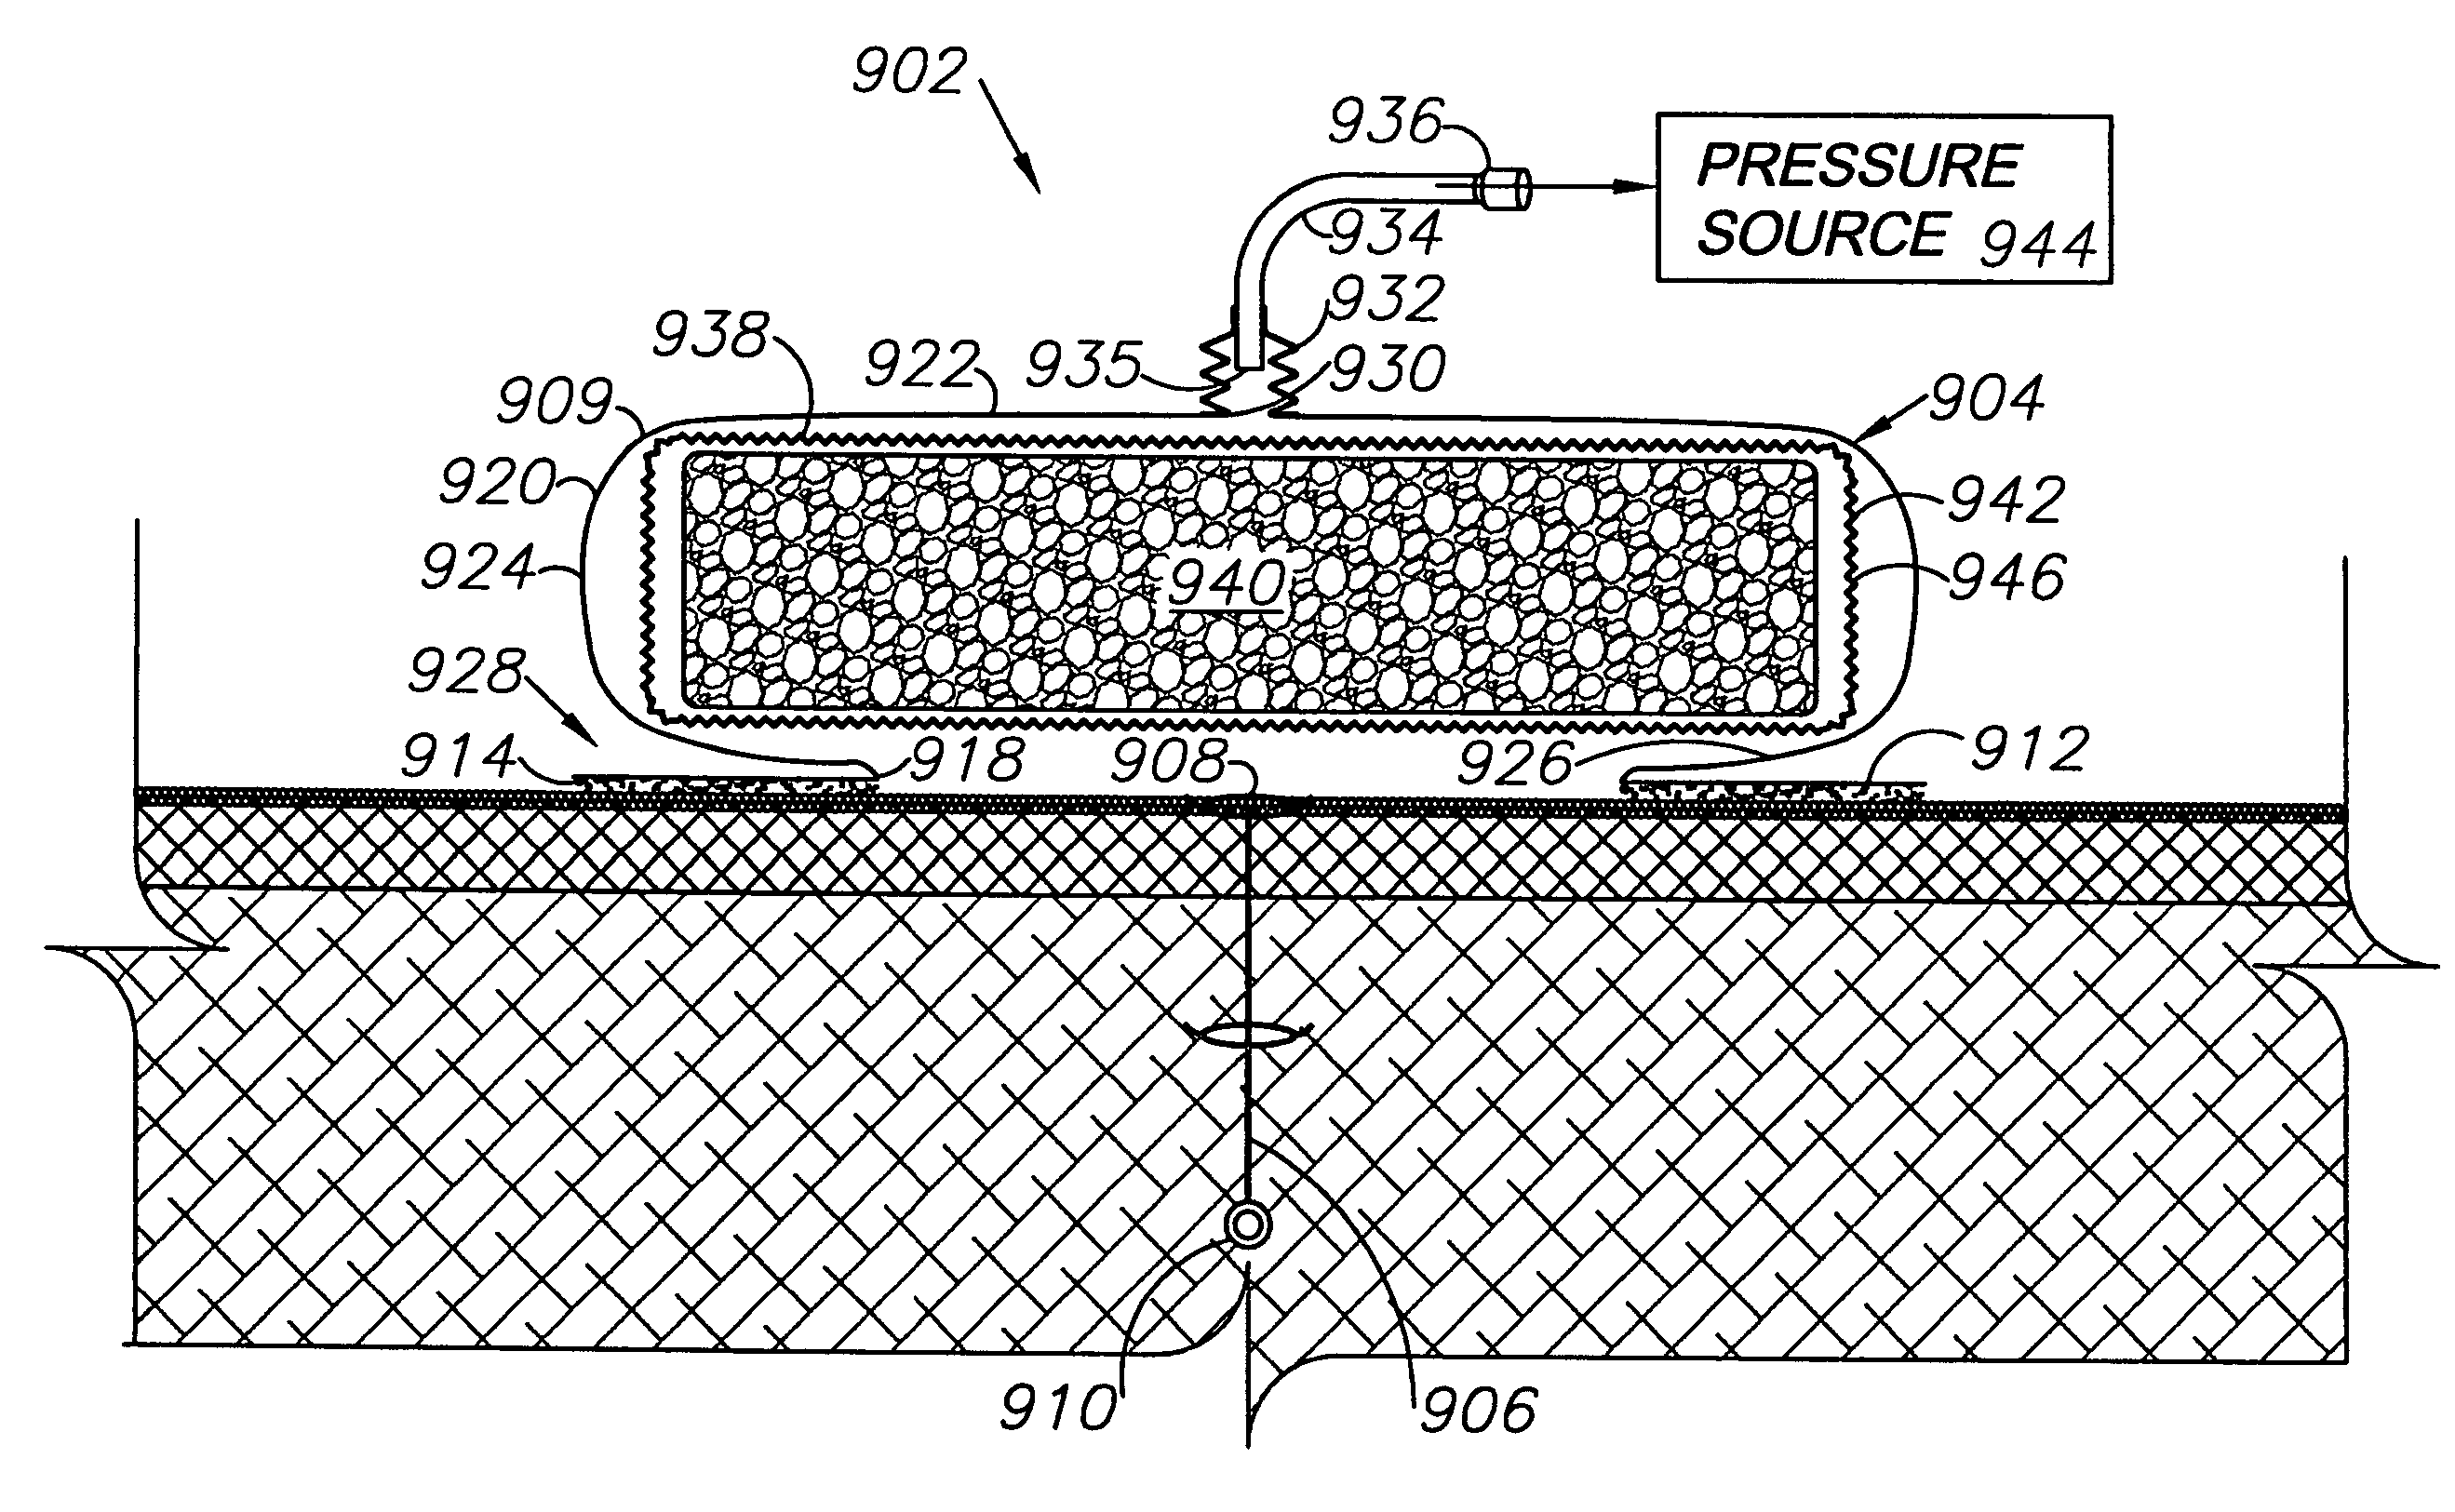 Externally-applied patient interface system and method